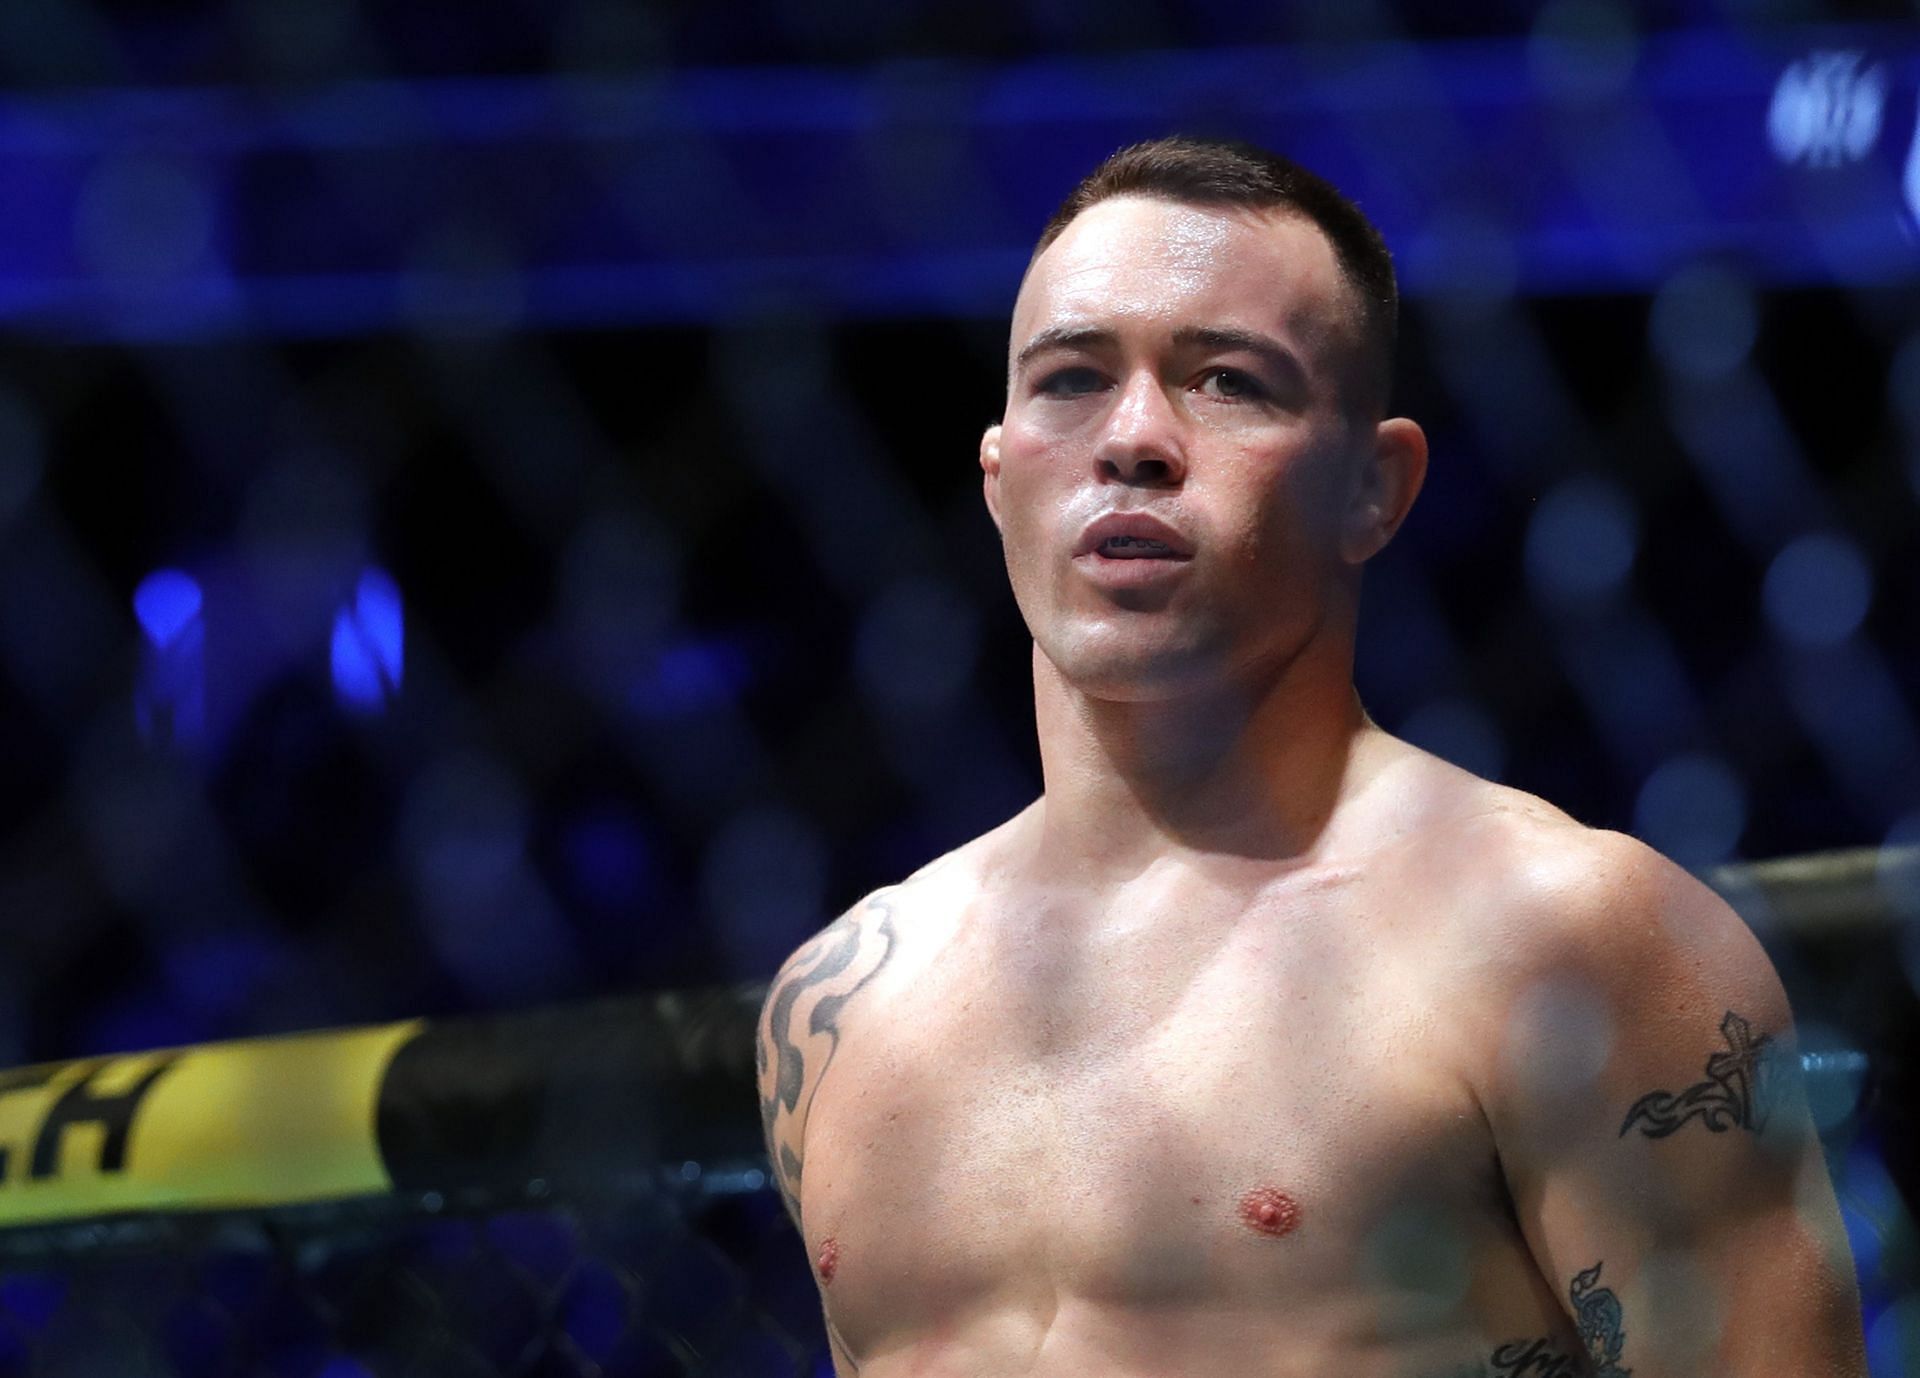 Colby Covington holds a record of 16-3